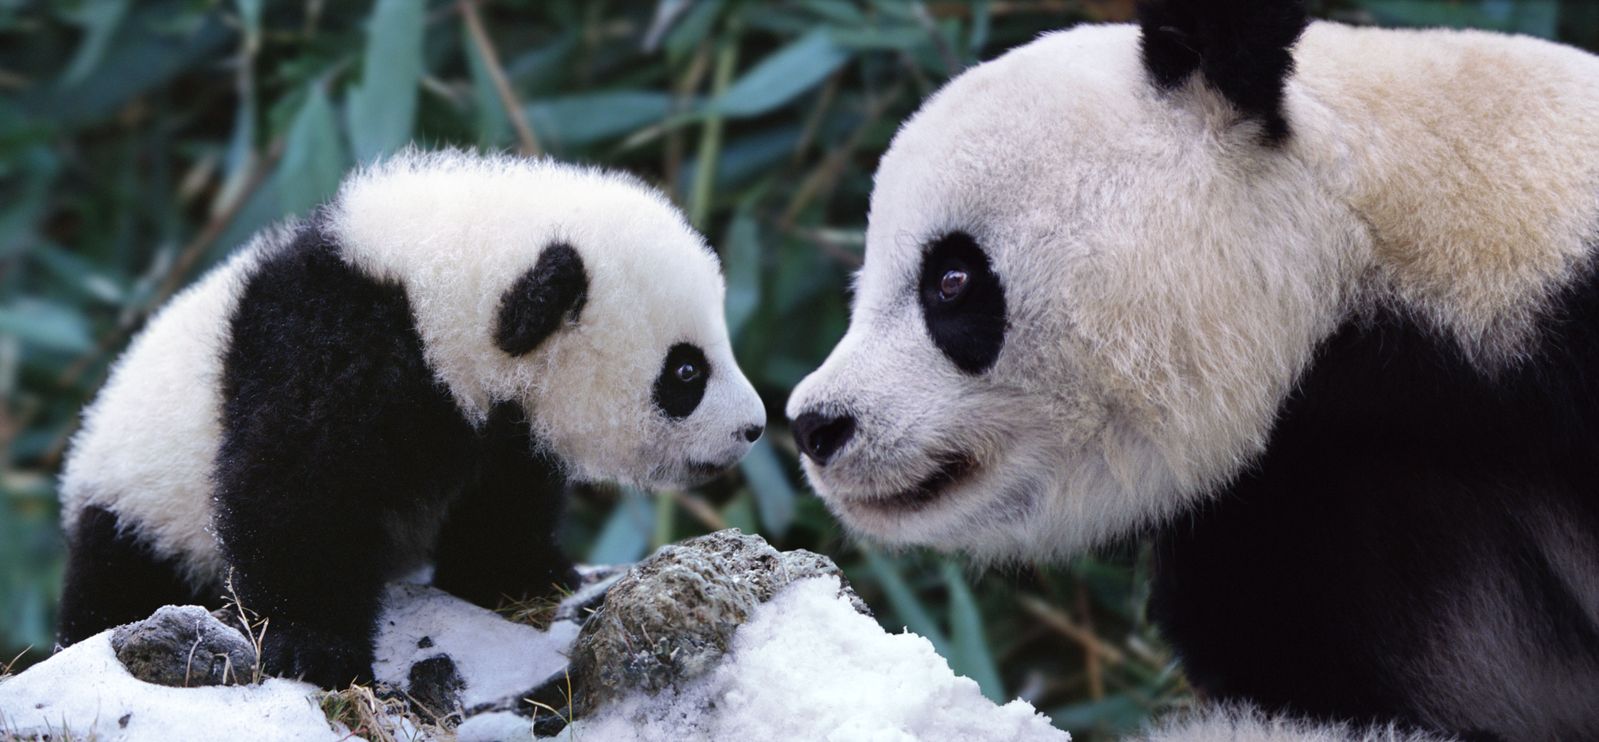 Tiny Porn Clips - Why Panda Sex Isn't Black and White | Science| Smithsonian Magazine